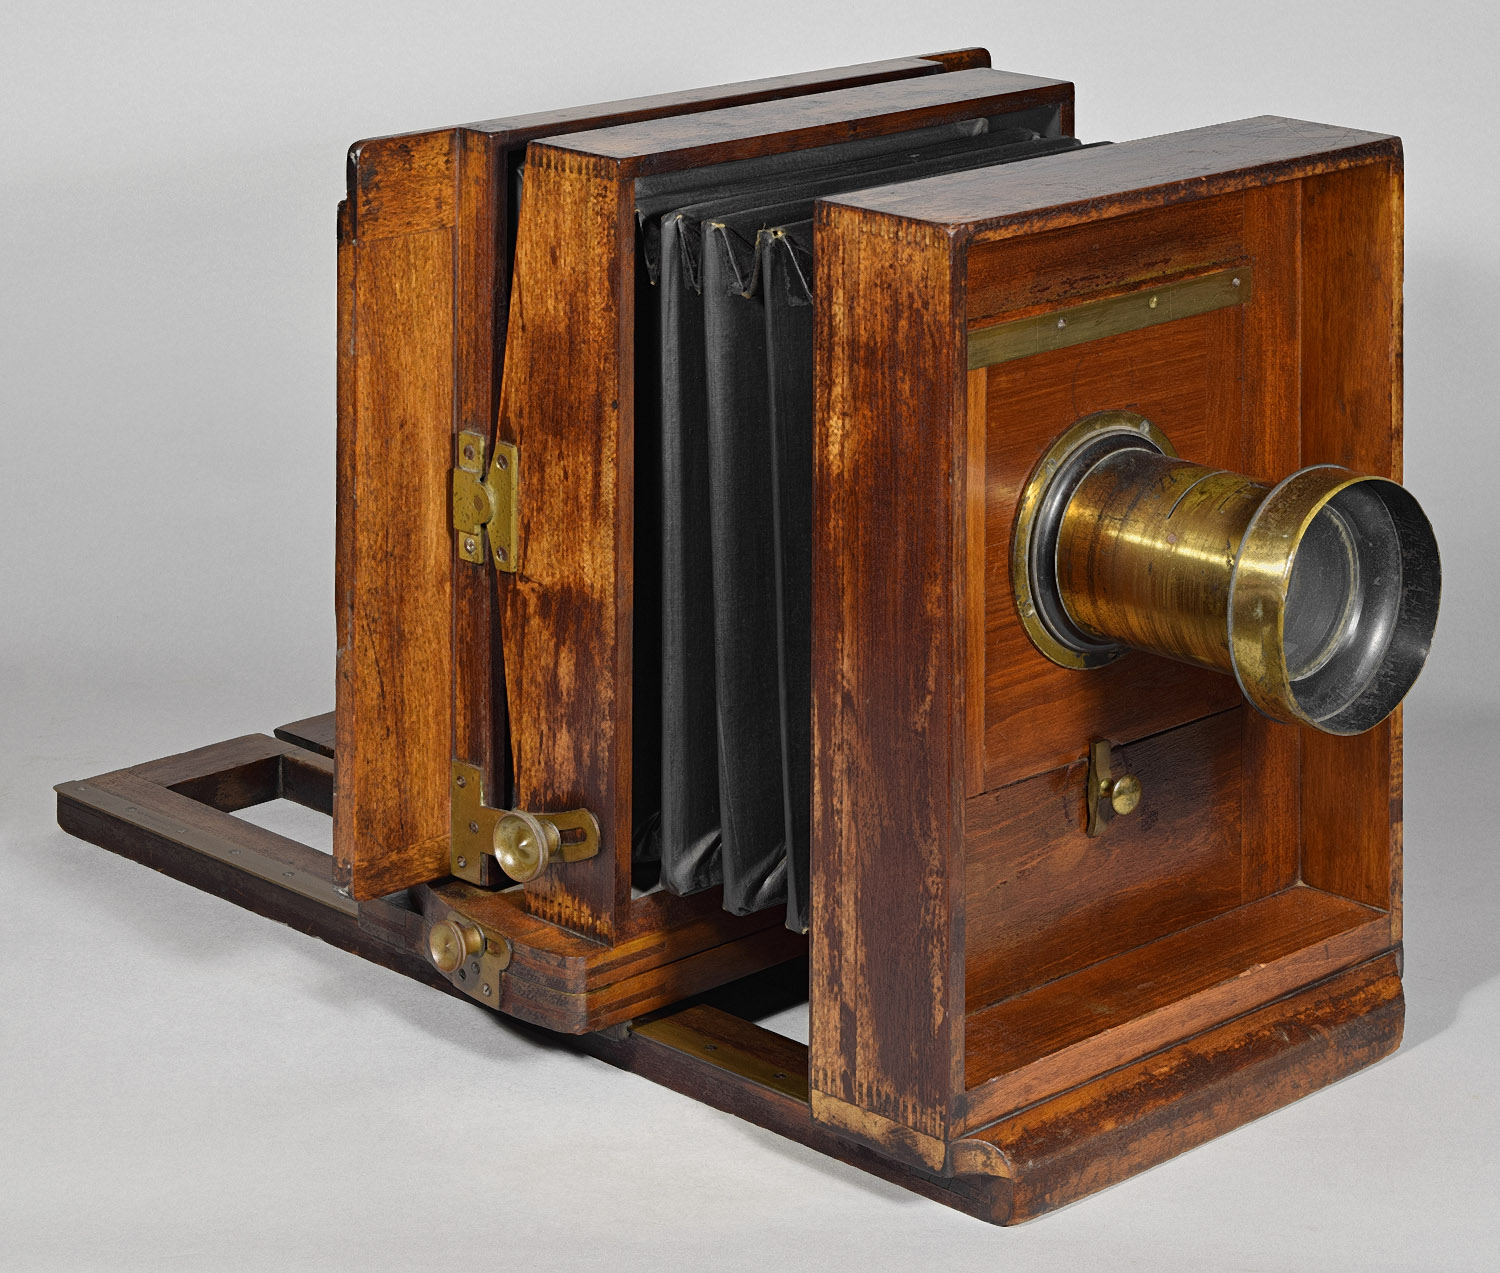 1240-American.Optical.Imperial.Cabinet.Camera-10x10-a-camera.only.single.lens-1500.jpg